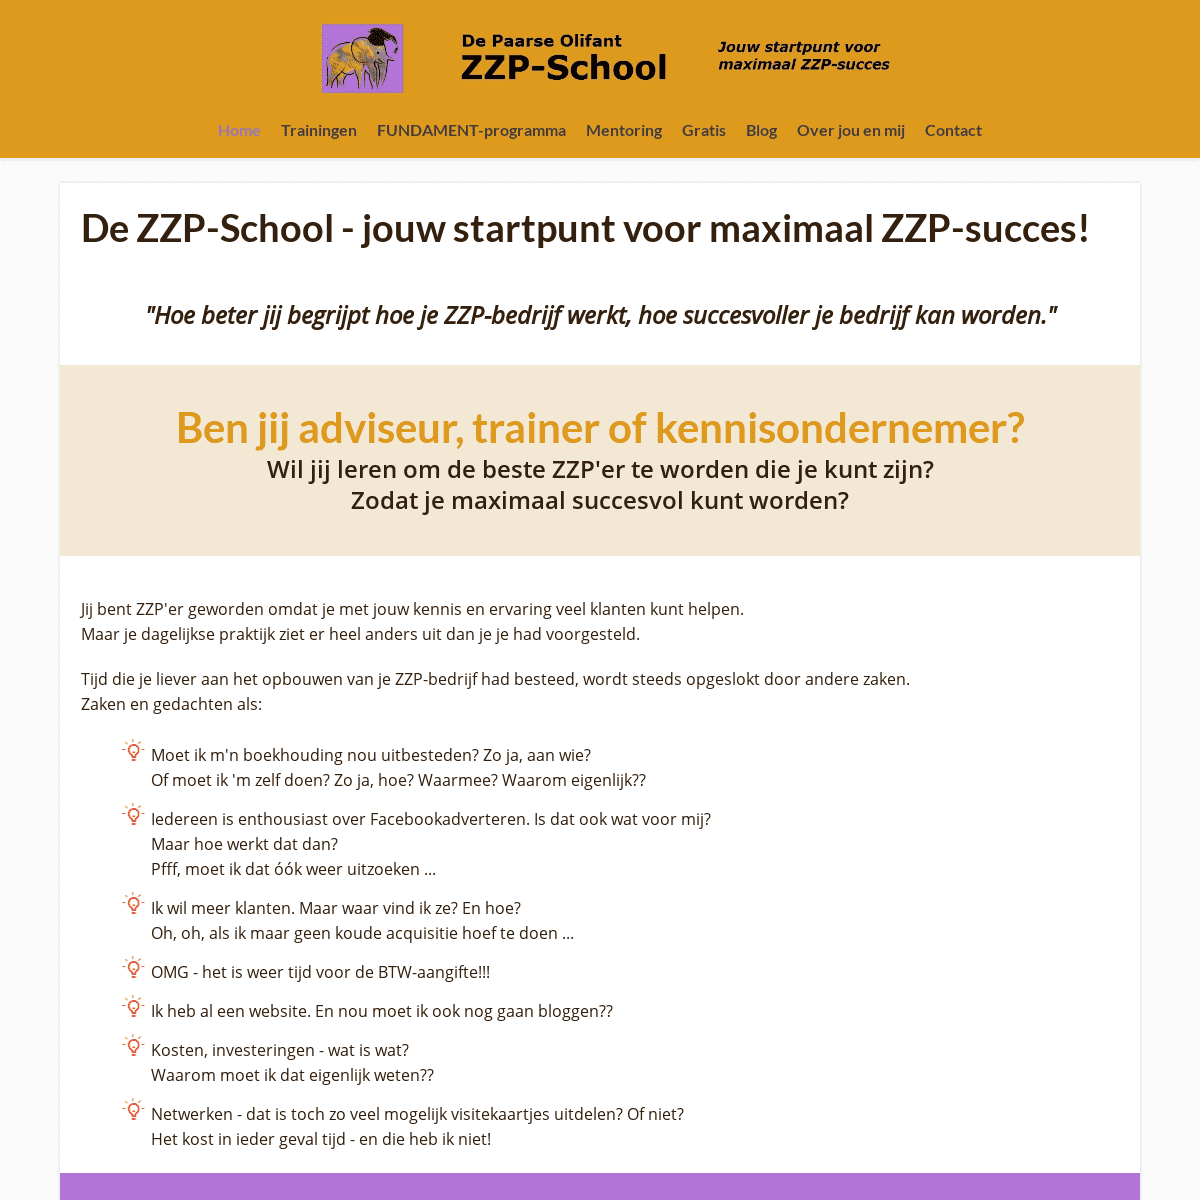 A complete backup of zzp-school.nl